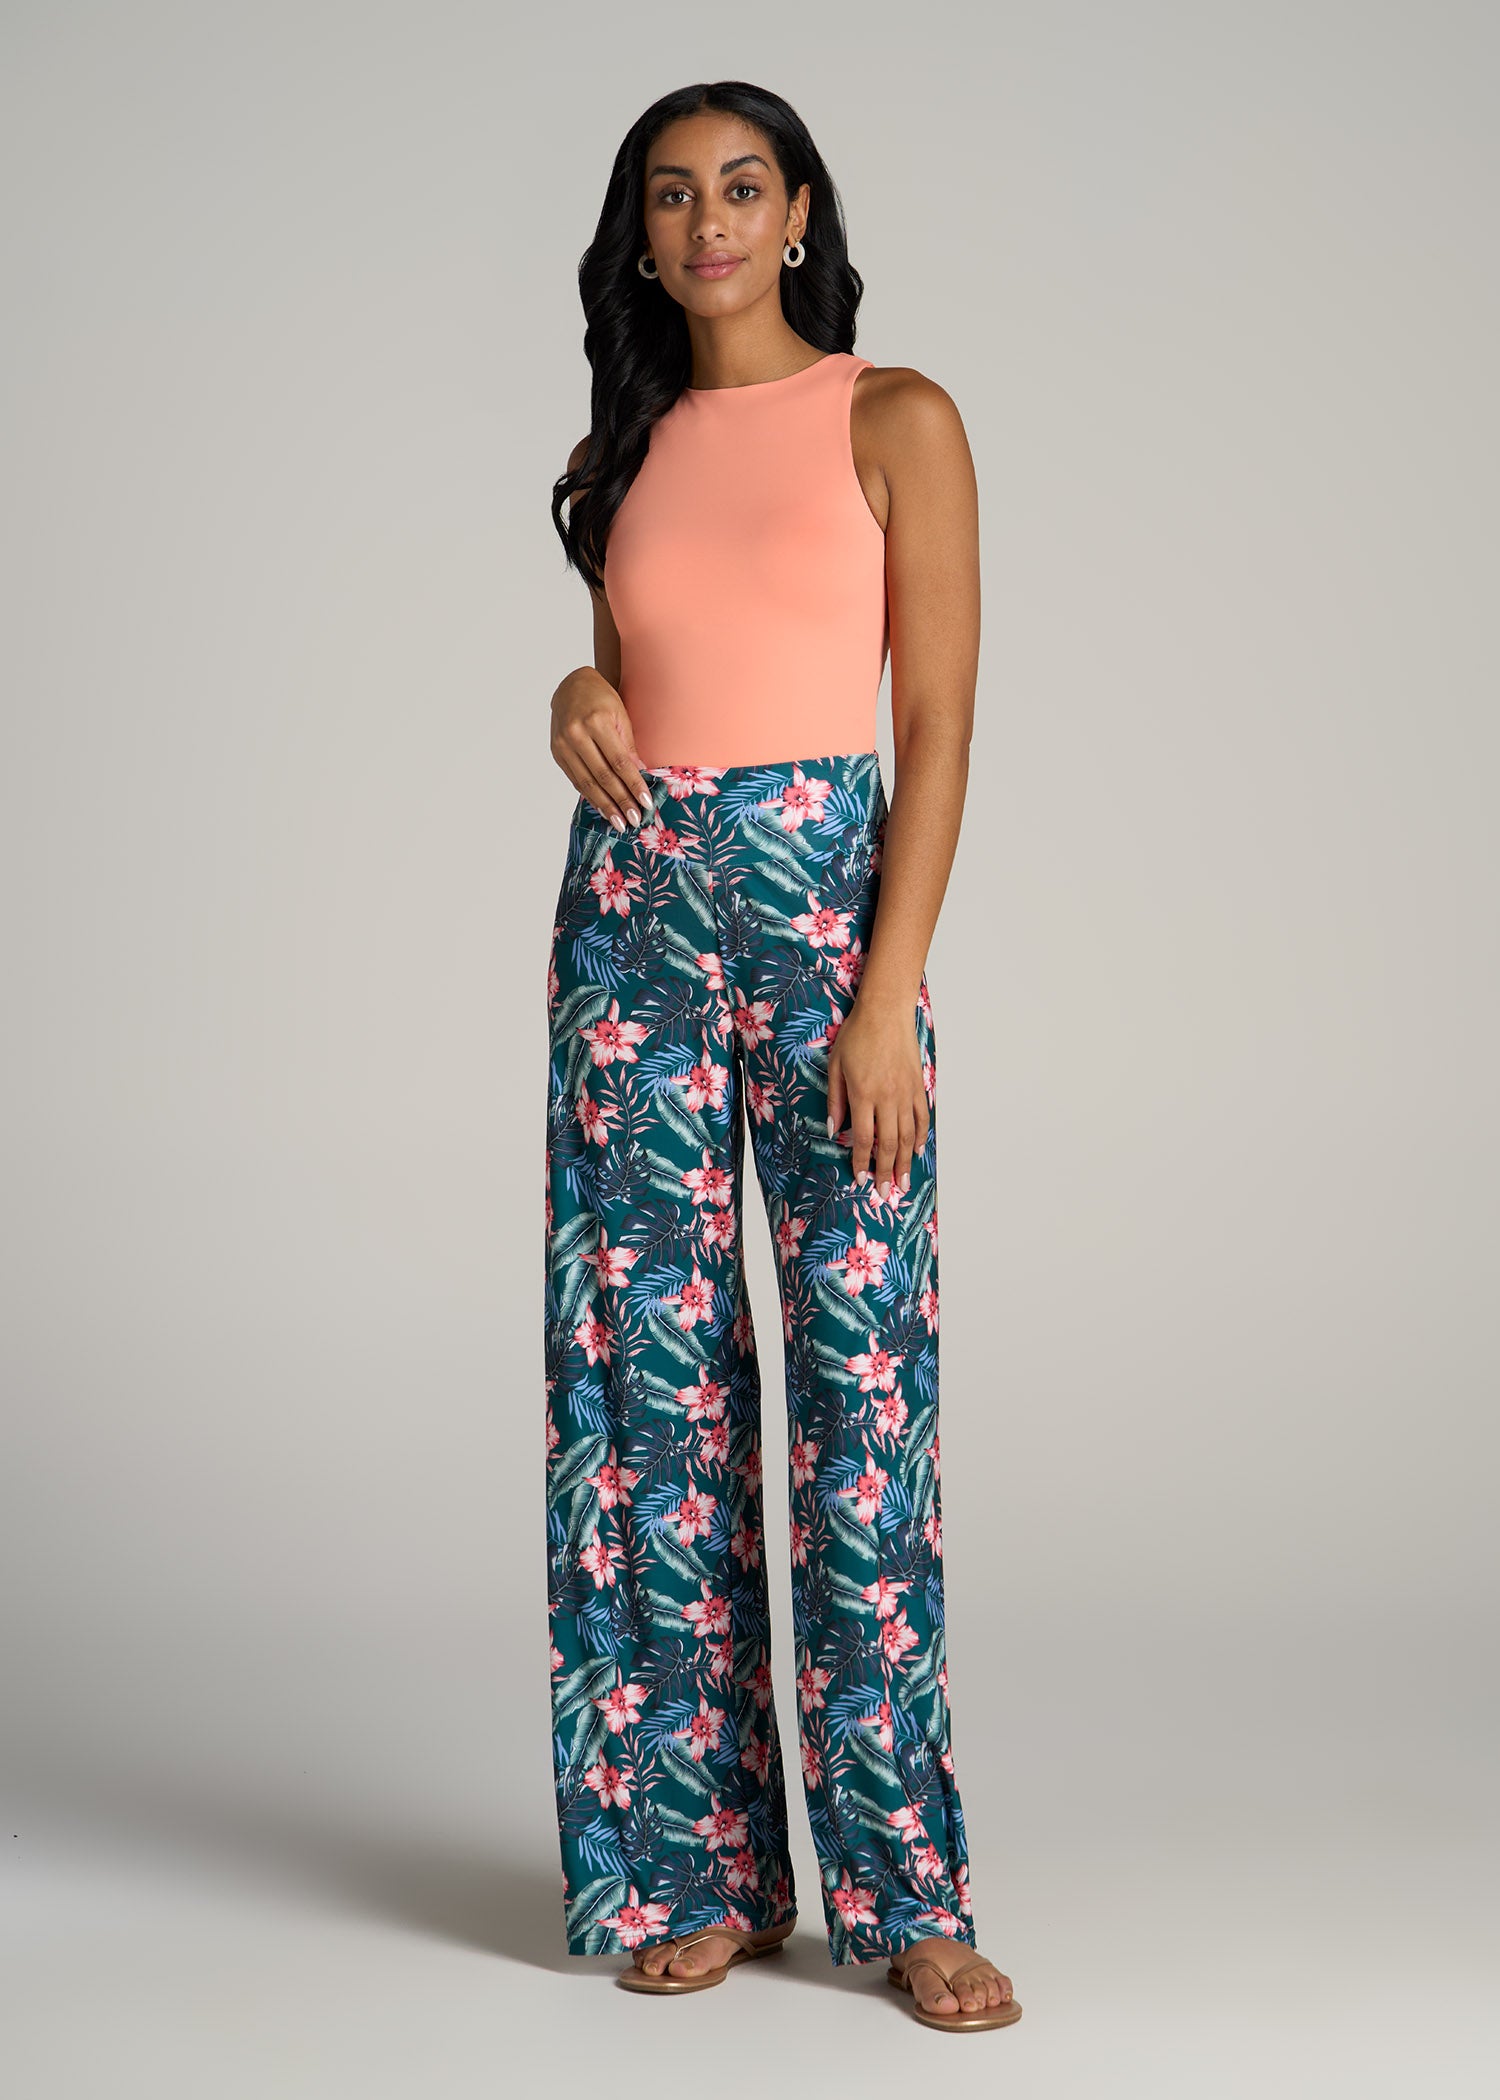 15 Gorgeous Looks With Floral Wide Leg Pants - Styleoholic